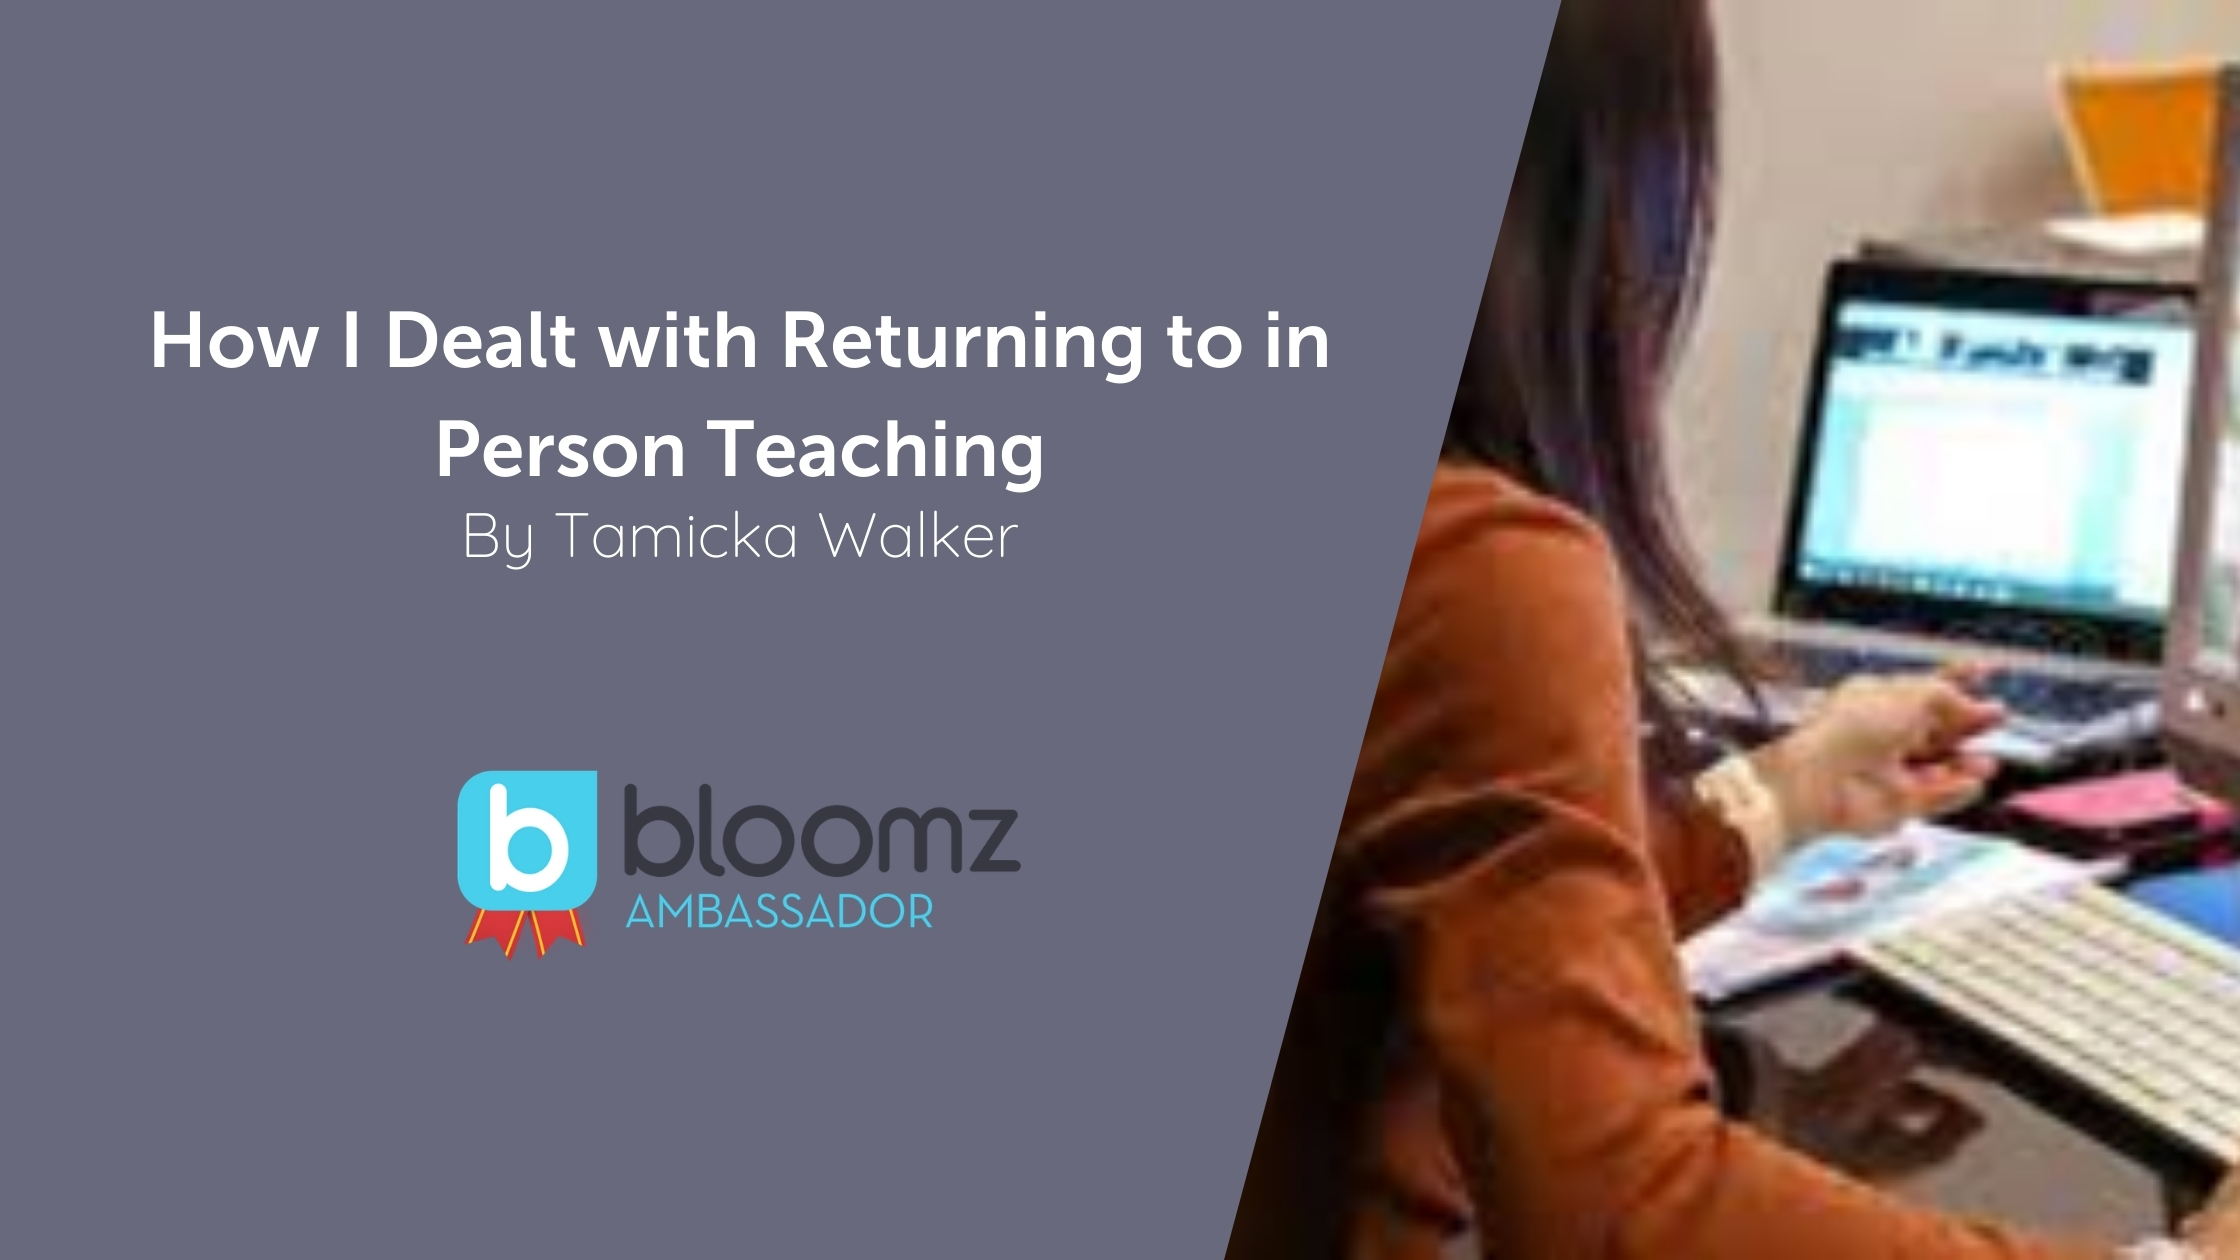 How I Dealt with Returning to in-Person Teaching